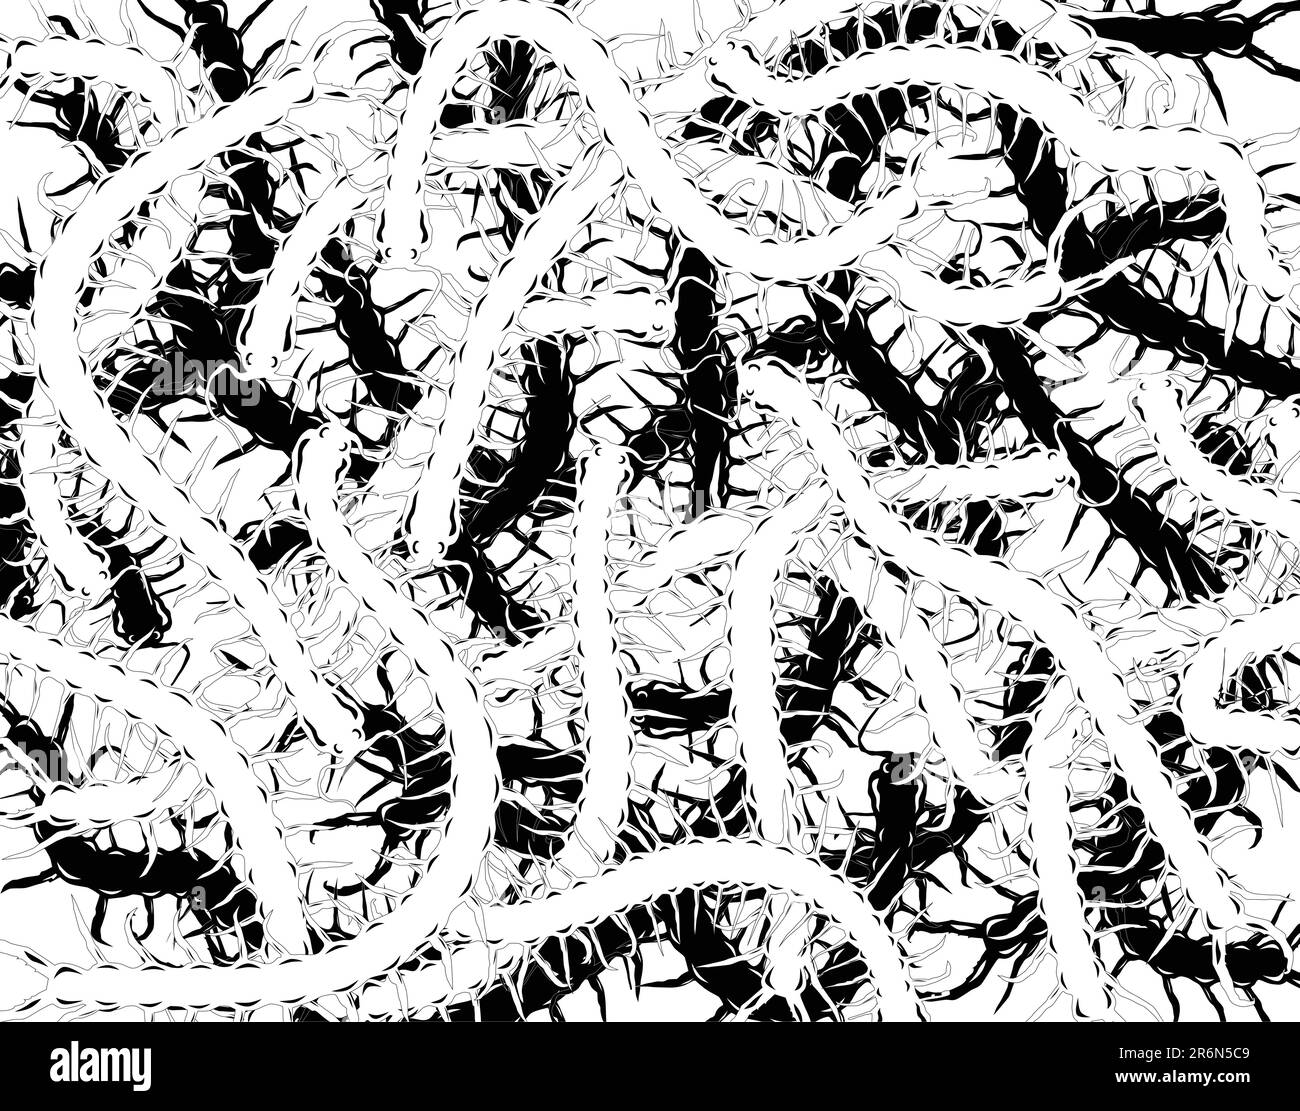 Editable vector design of a mass of centipedes including brushes Stock Vector